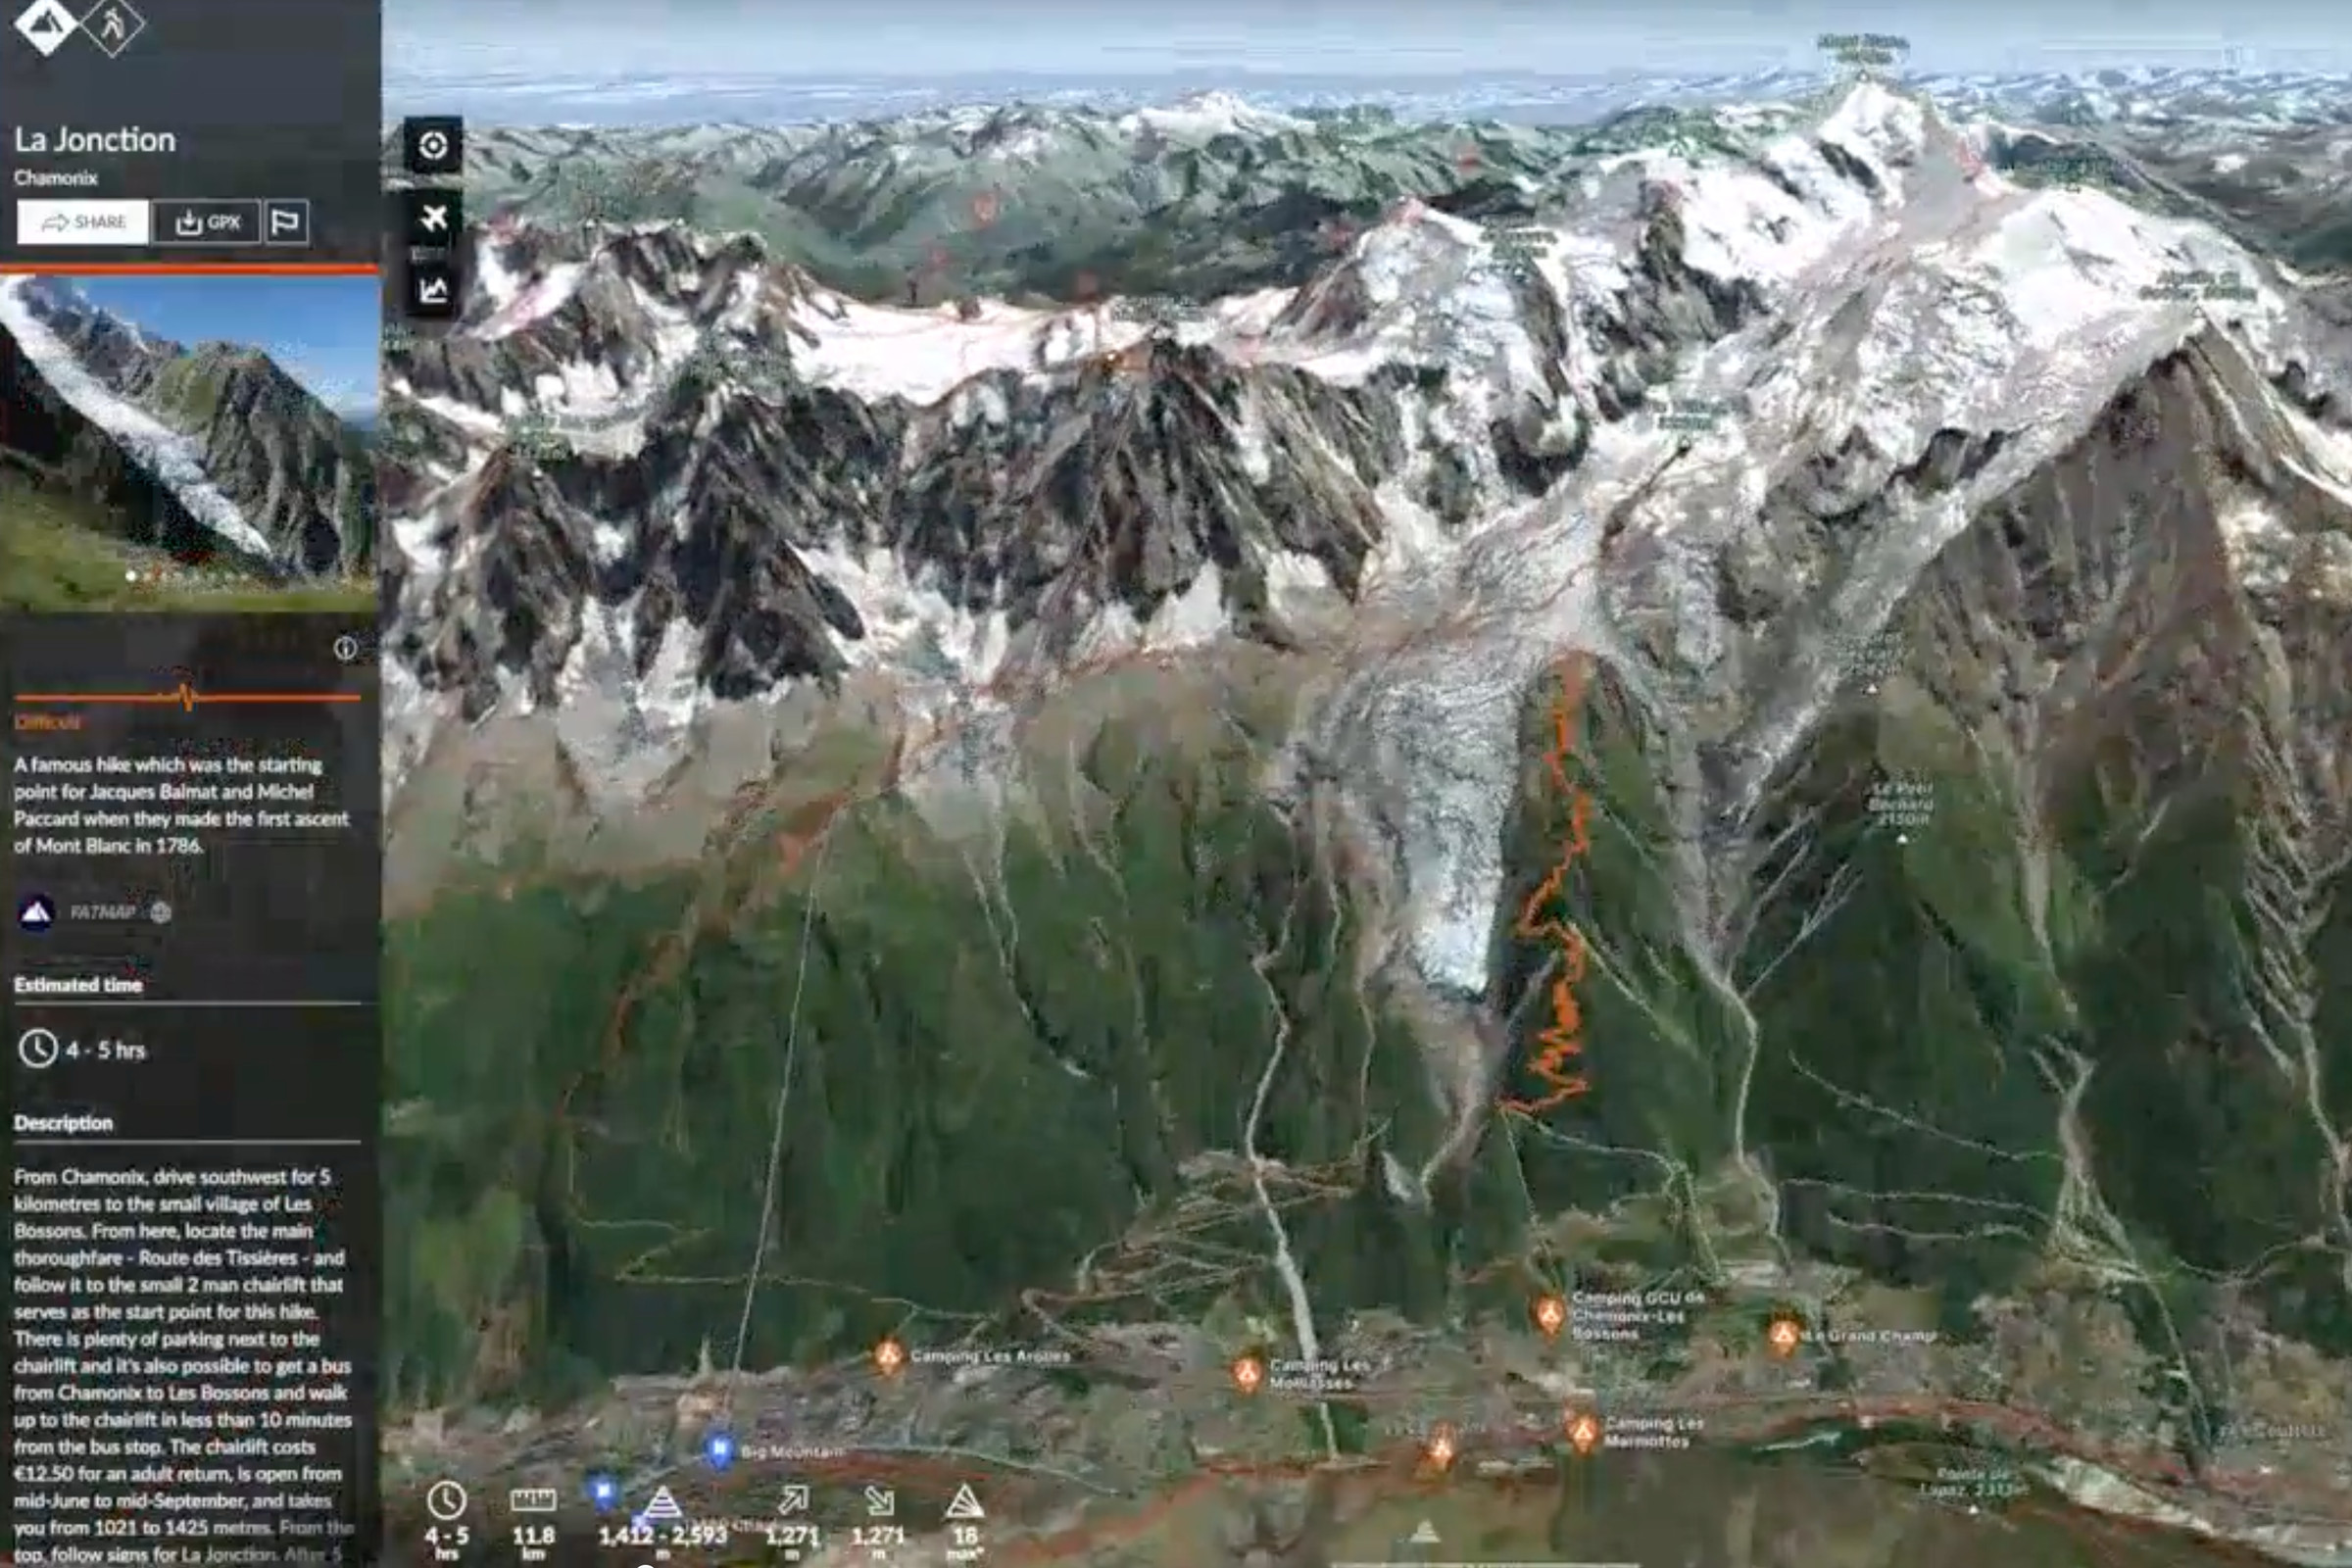 Visual mockup of a 3D mountain with various points of interest mapped in Strava app.